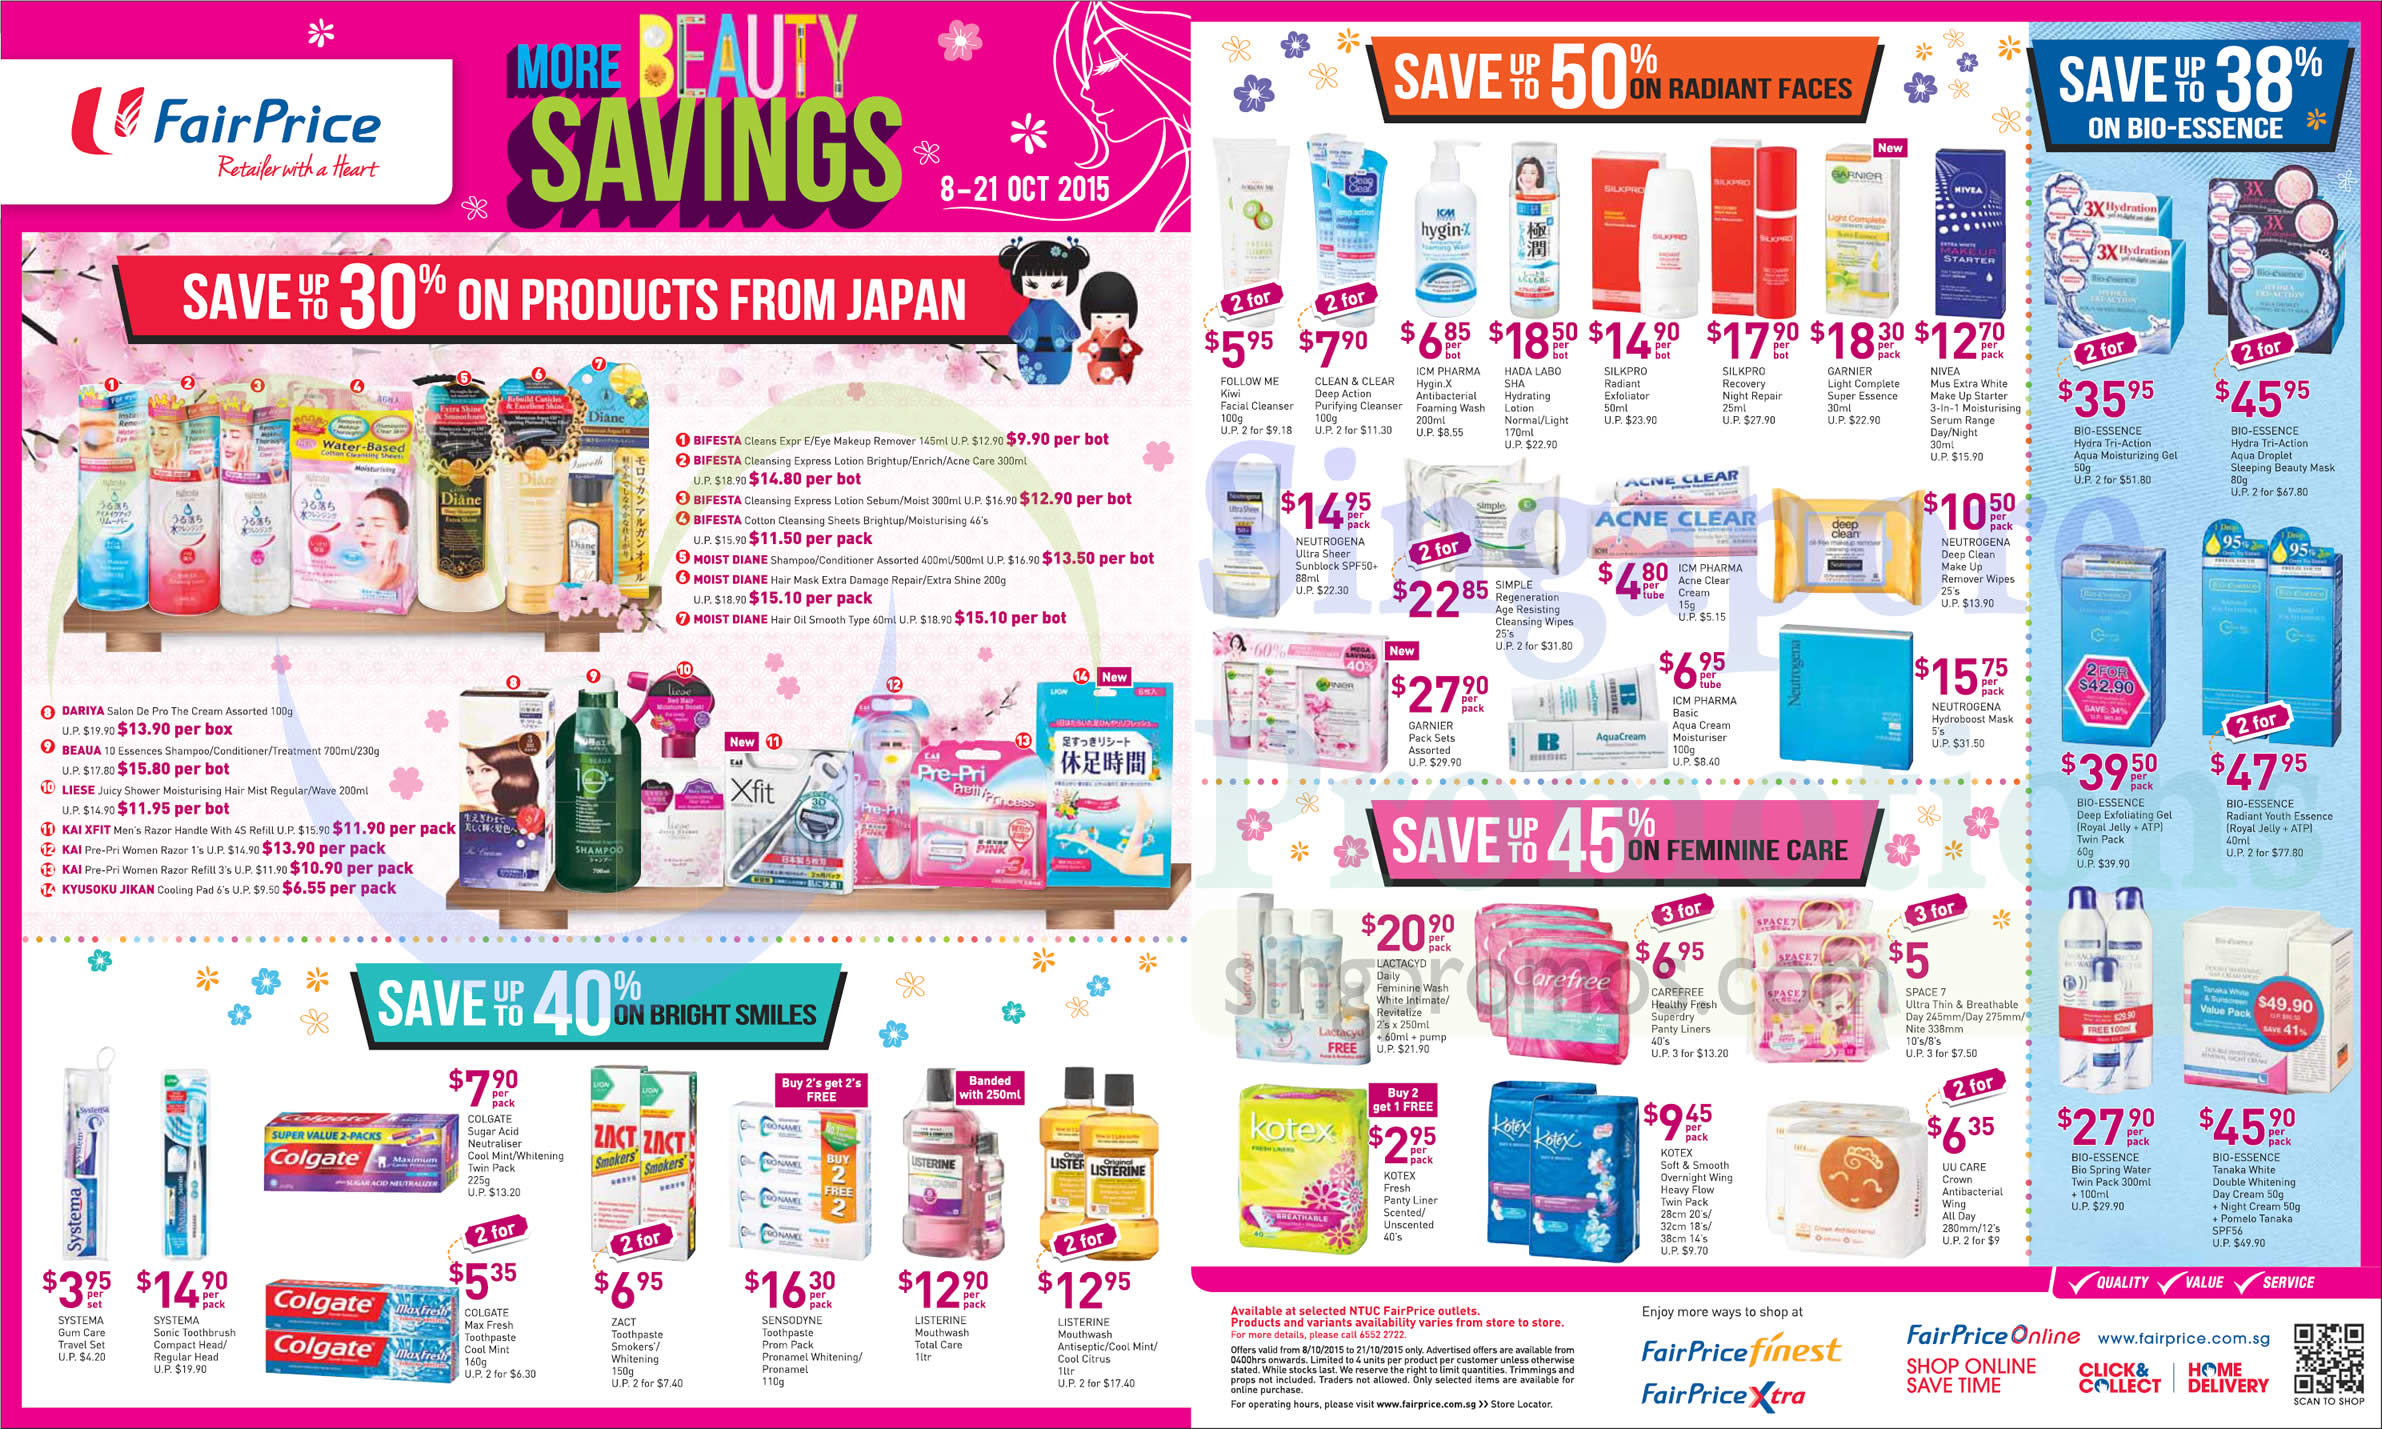 Skin Care Products, Hair Care, Dental Care, Mouthwashes, Shampoos,  Toothpastes, Feminine Care Products, Beauty Masks, Facial Wash, Panty  Liners, Hair Oil, Moist Diane, Sensodyne, Beaua, Colgate » Fairprice Weekly  Savers, Fruits, Groceries,